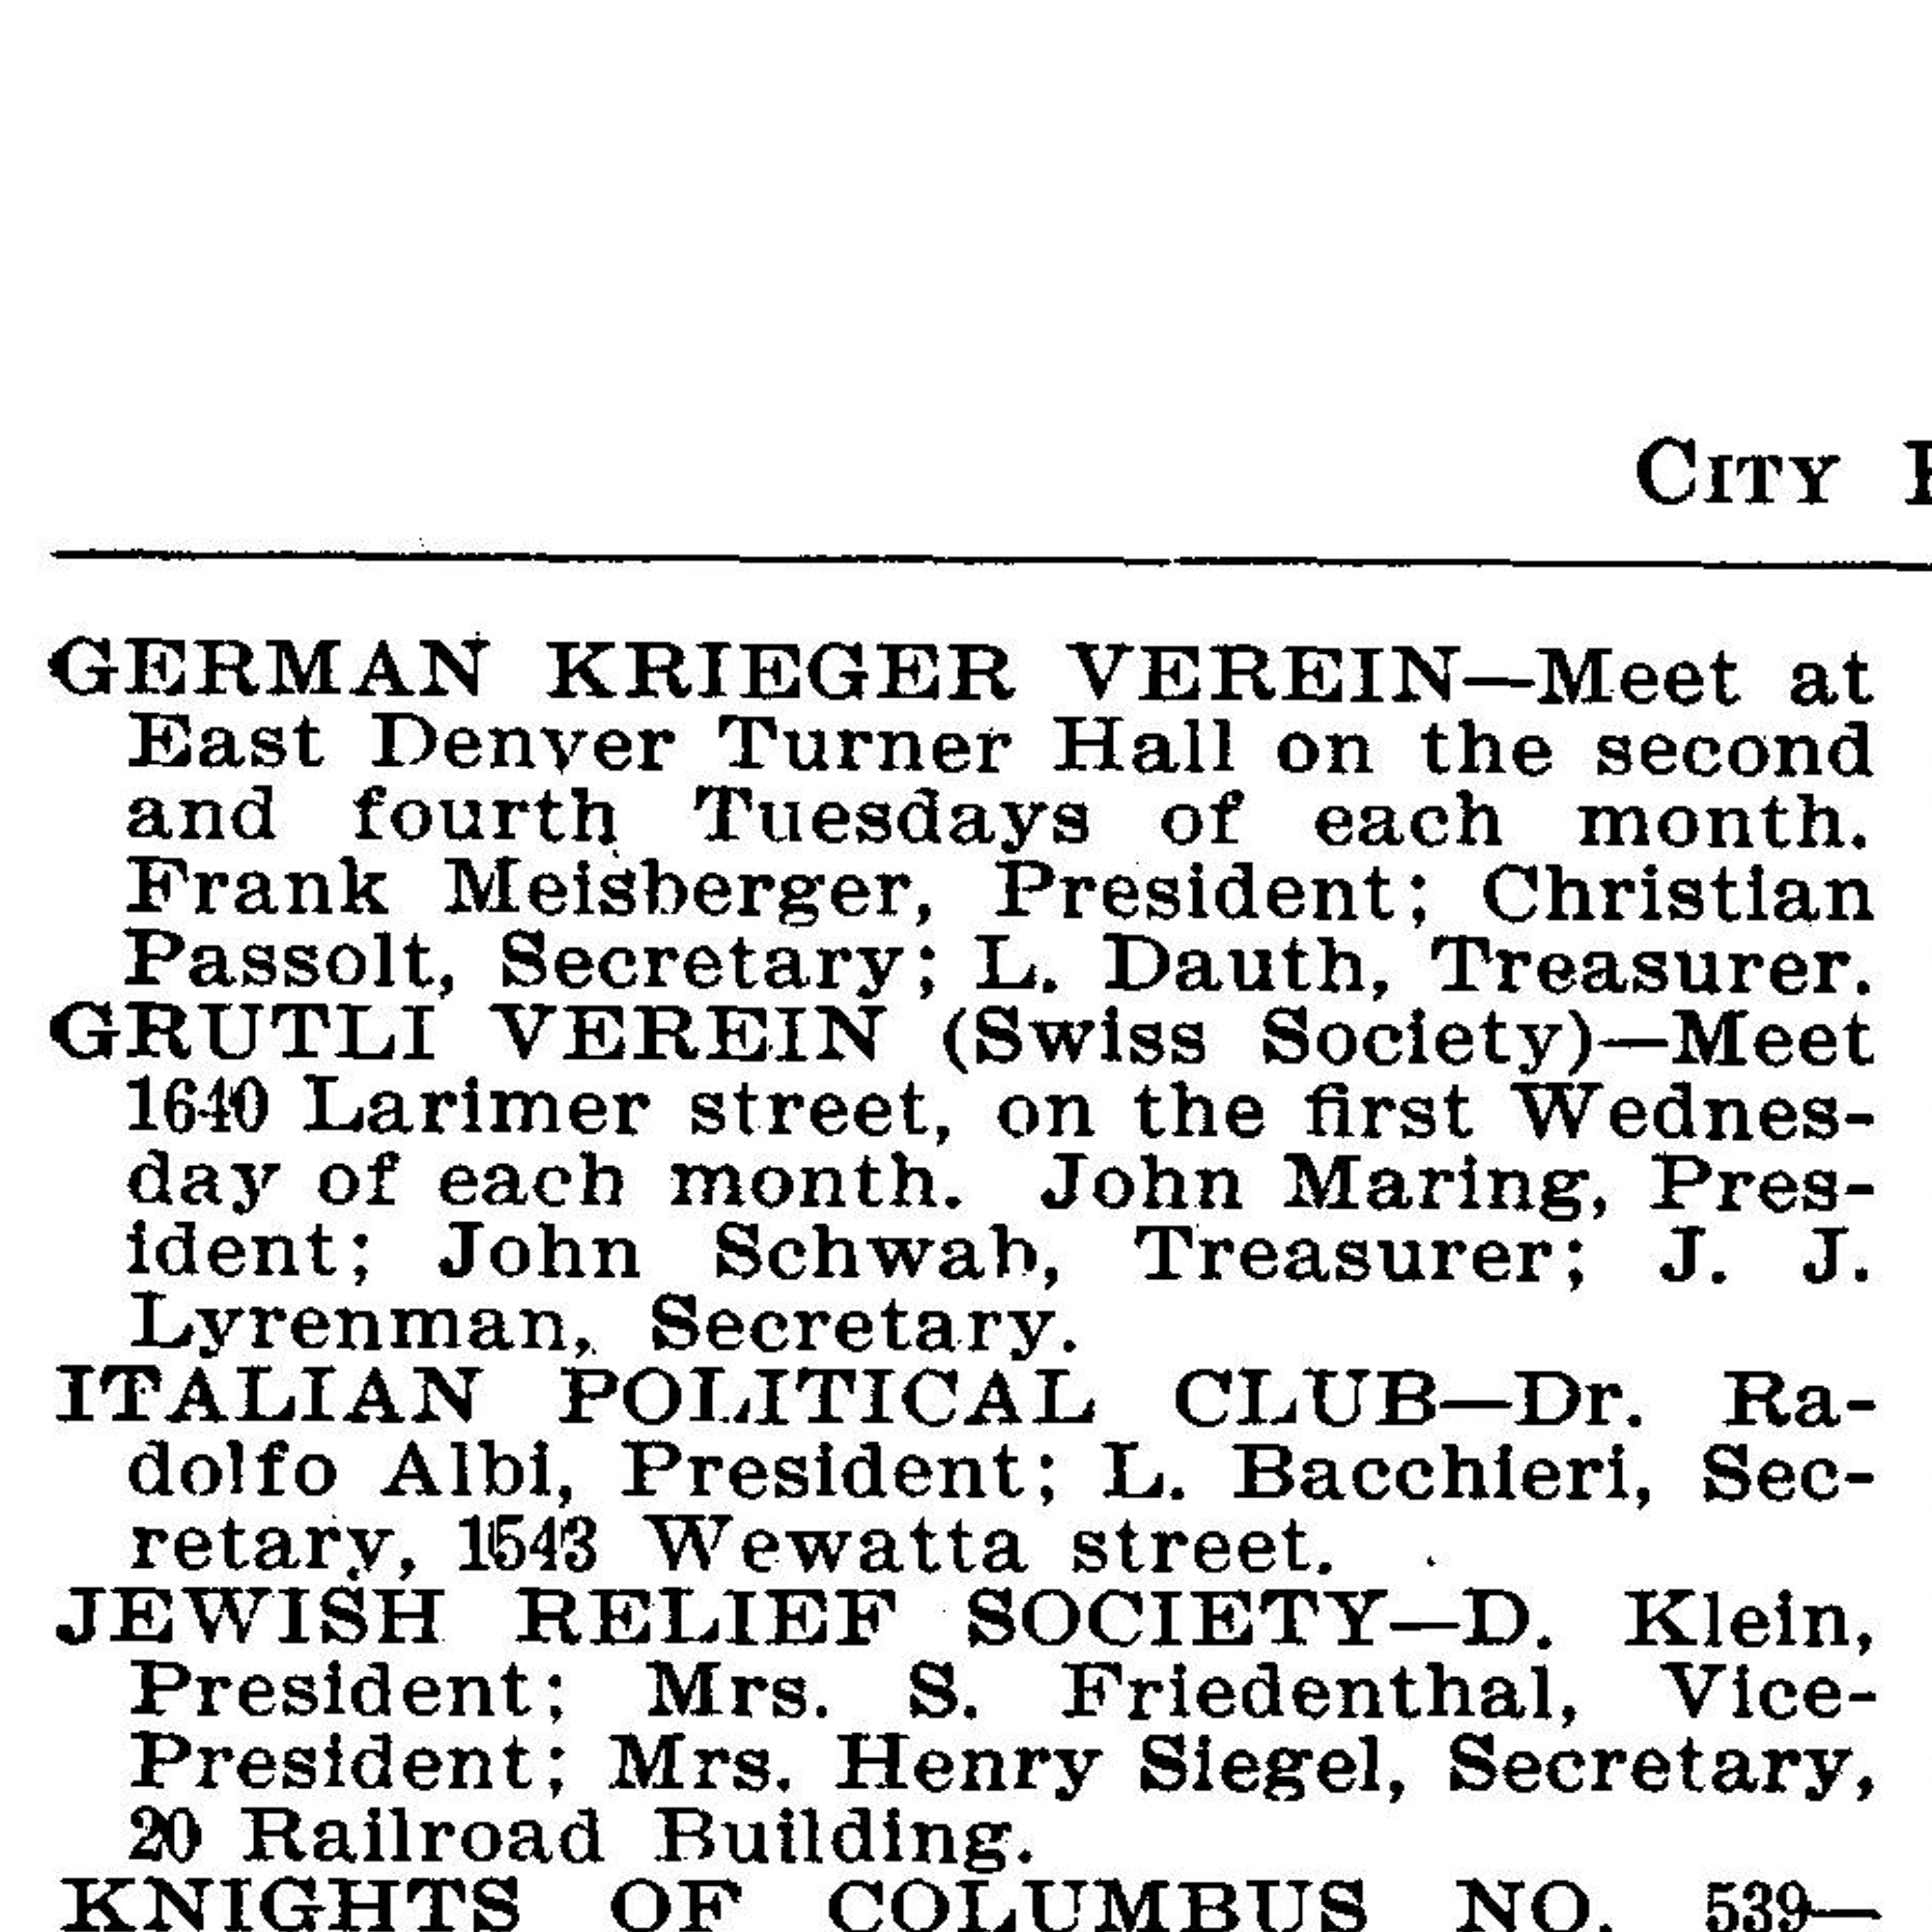 Dauth Family Archive - 1905 - Denver Directory - Entry For German Krieger Verein